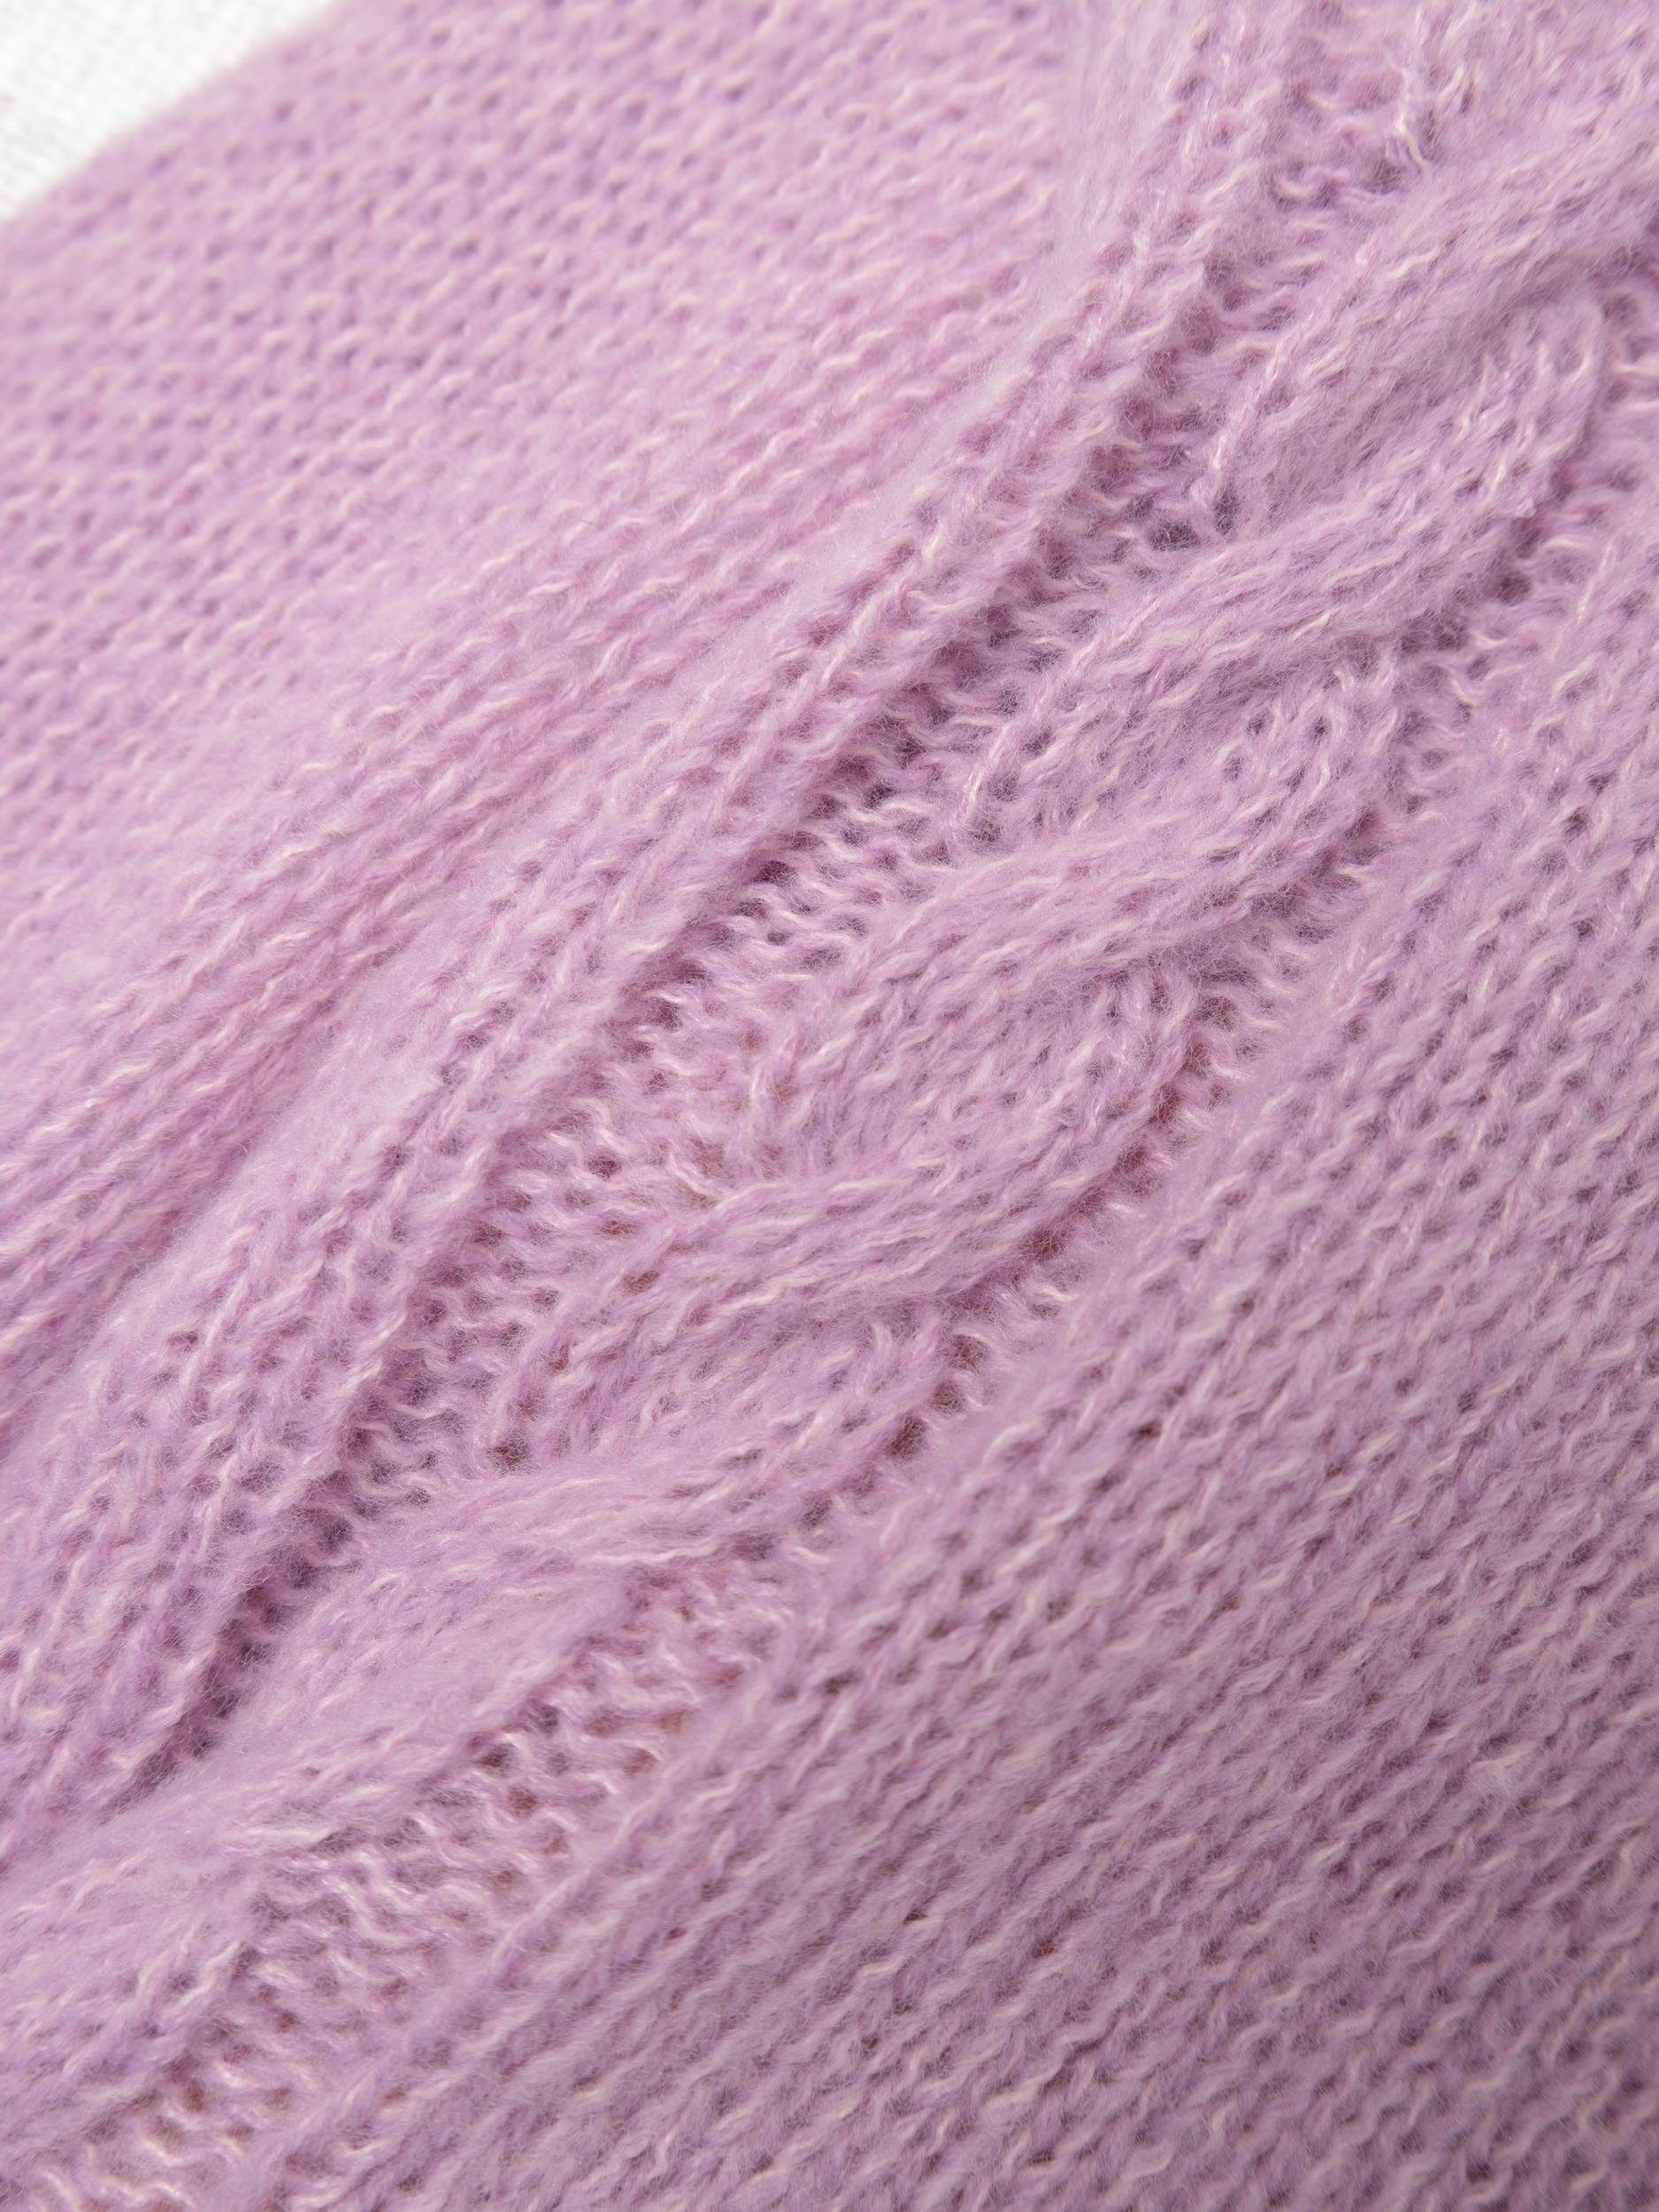 Name KNIT NMFOTHEA LS Strickpullover It